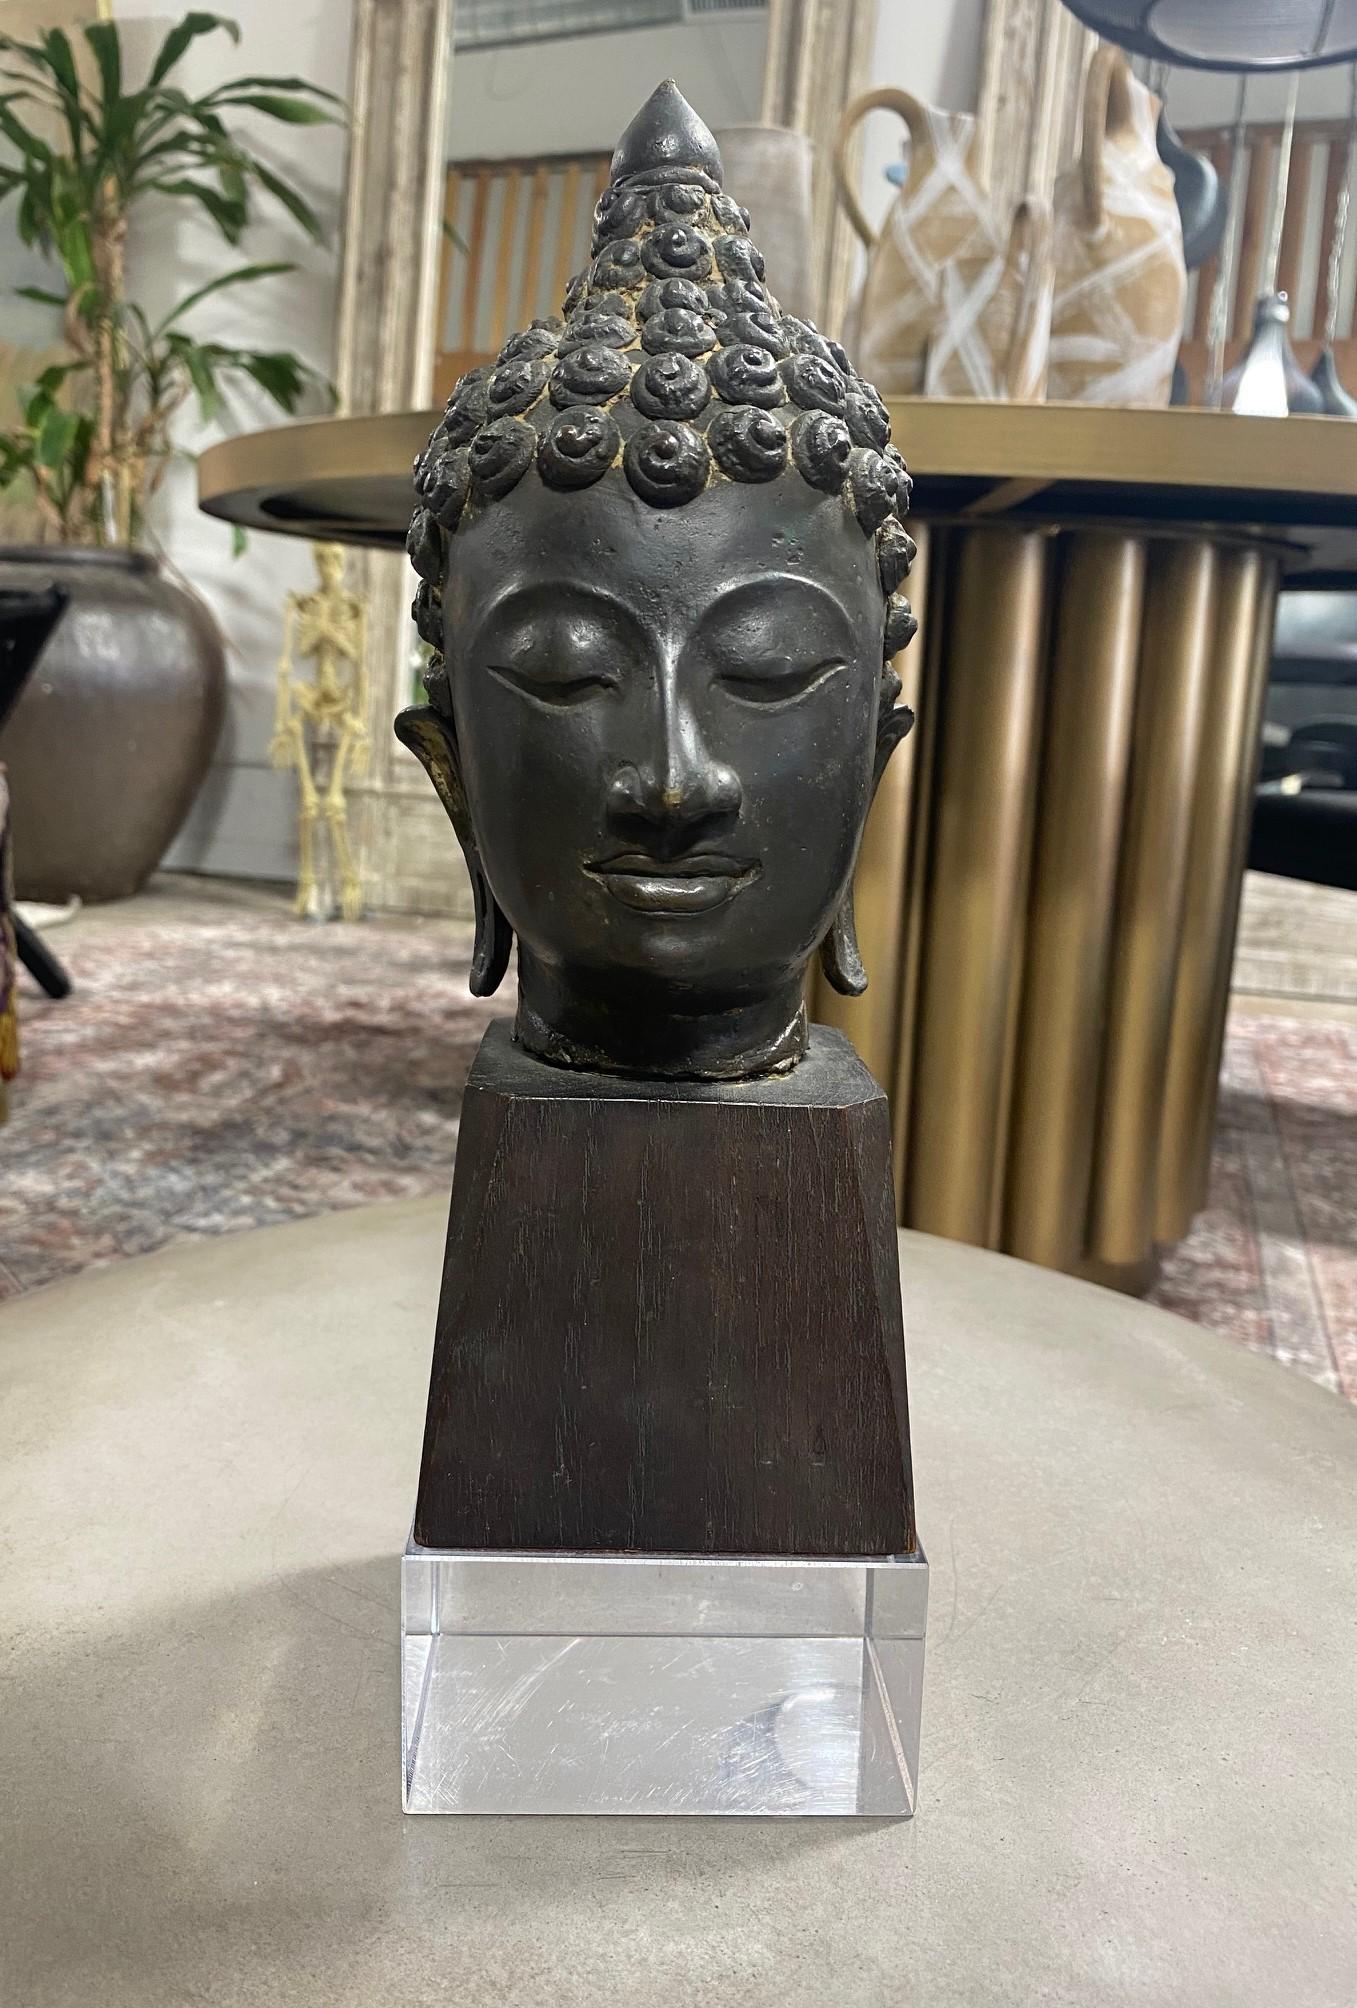 A wonderfully sculpted Thai/ Siam Southeast Asian bronze Buddha head on a custom wood and lucite stand. The Buddha's eyes are closed in serene meditation. The piece has a nice feel and heft to it. Very well well crafted with a gorgeous patina.